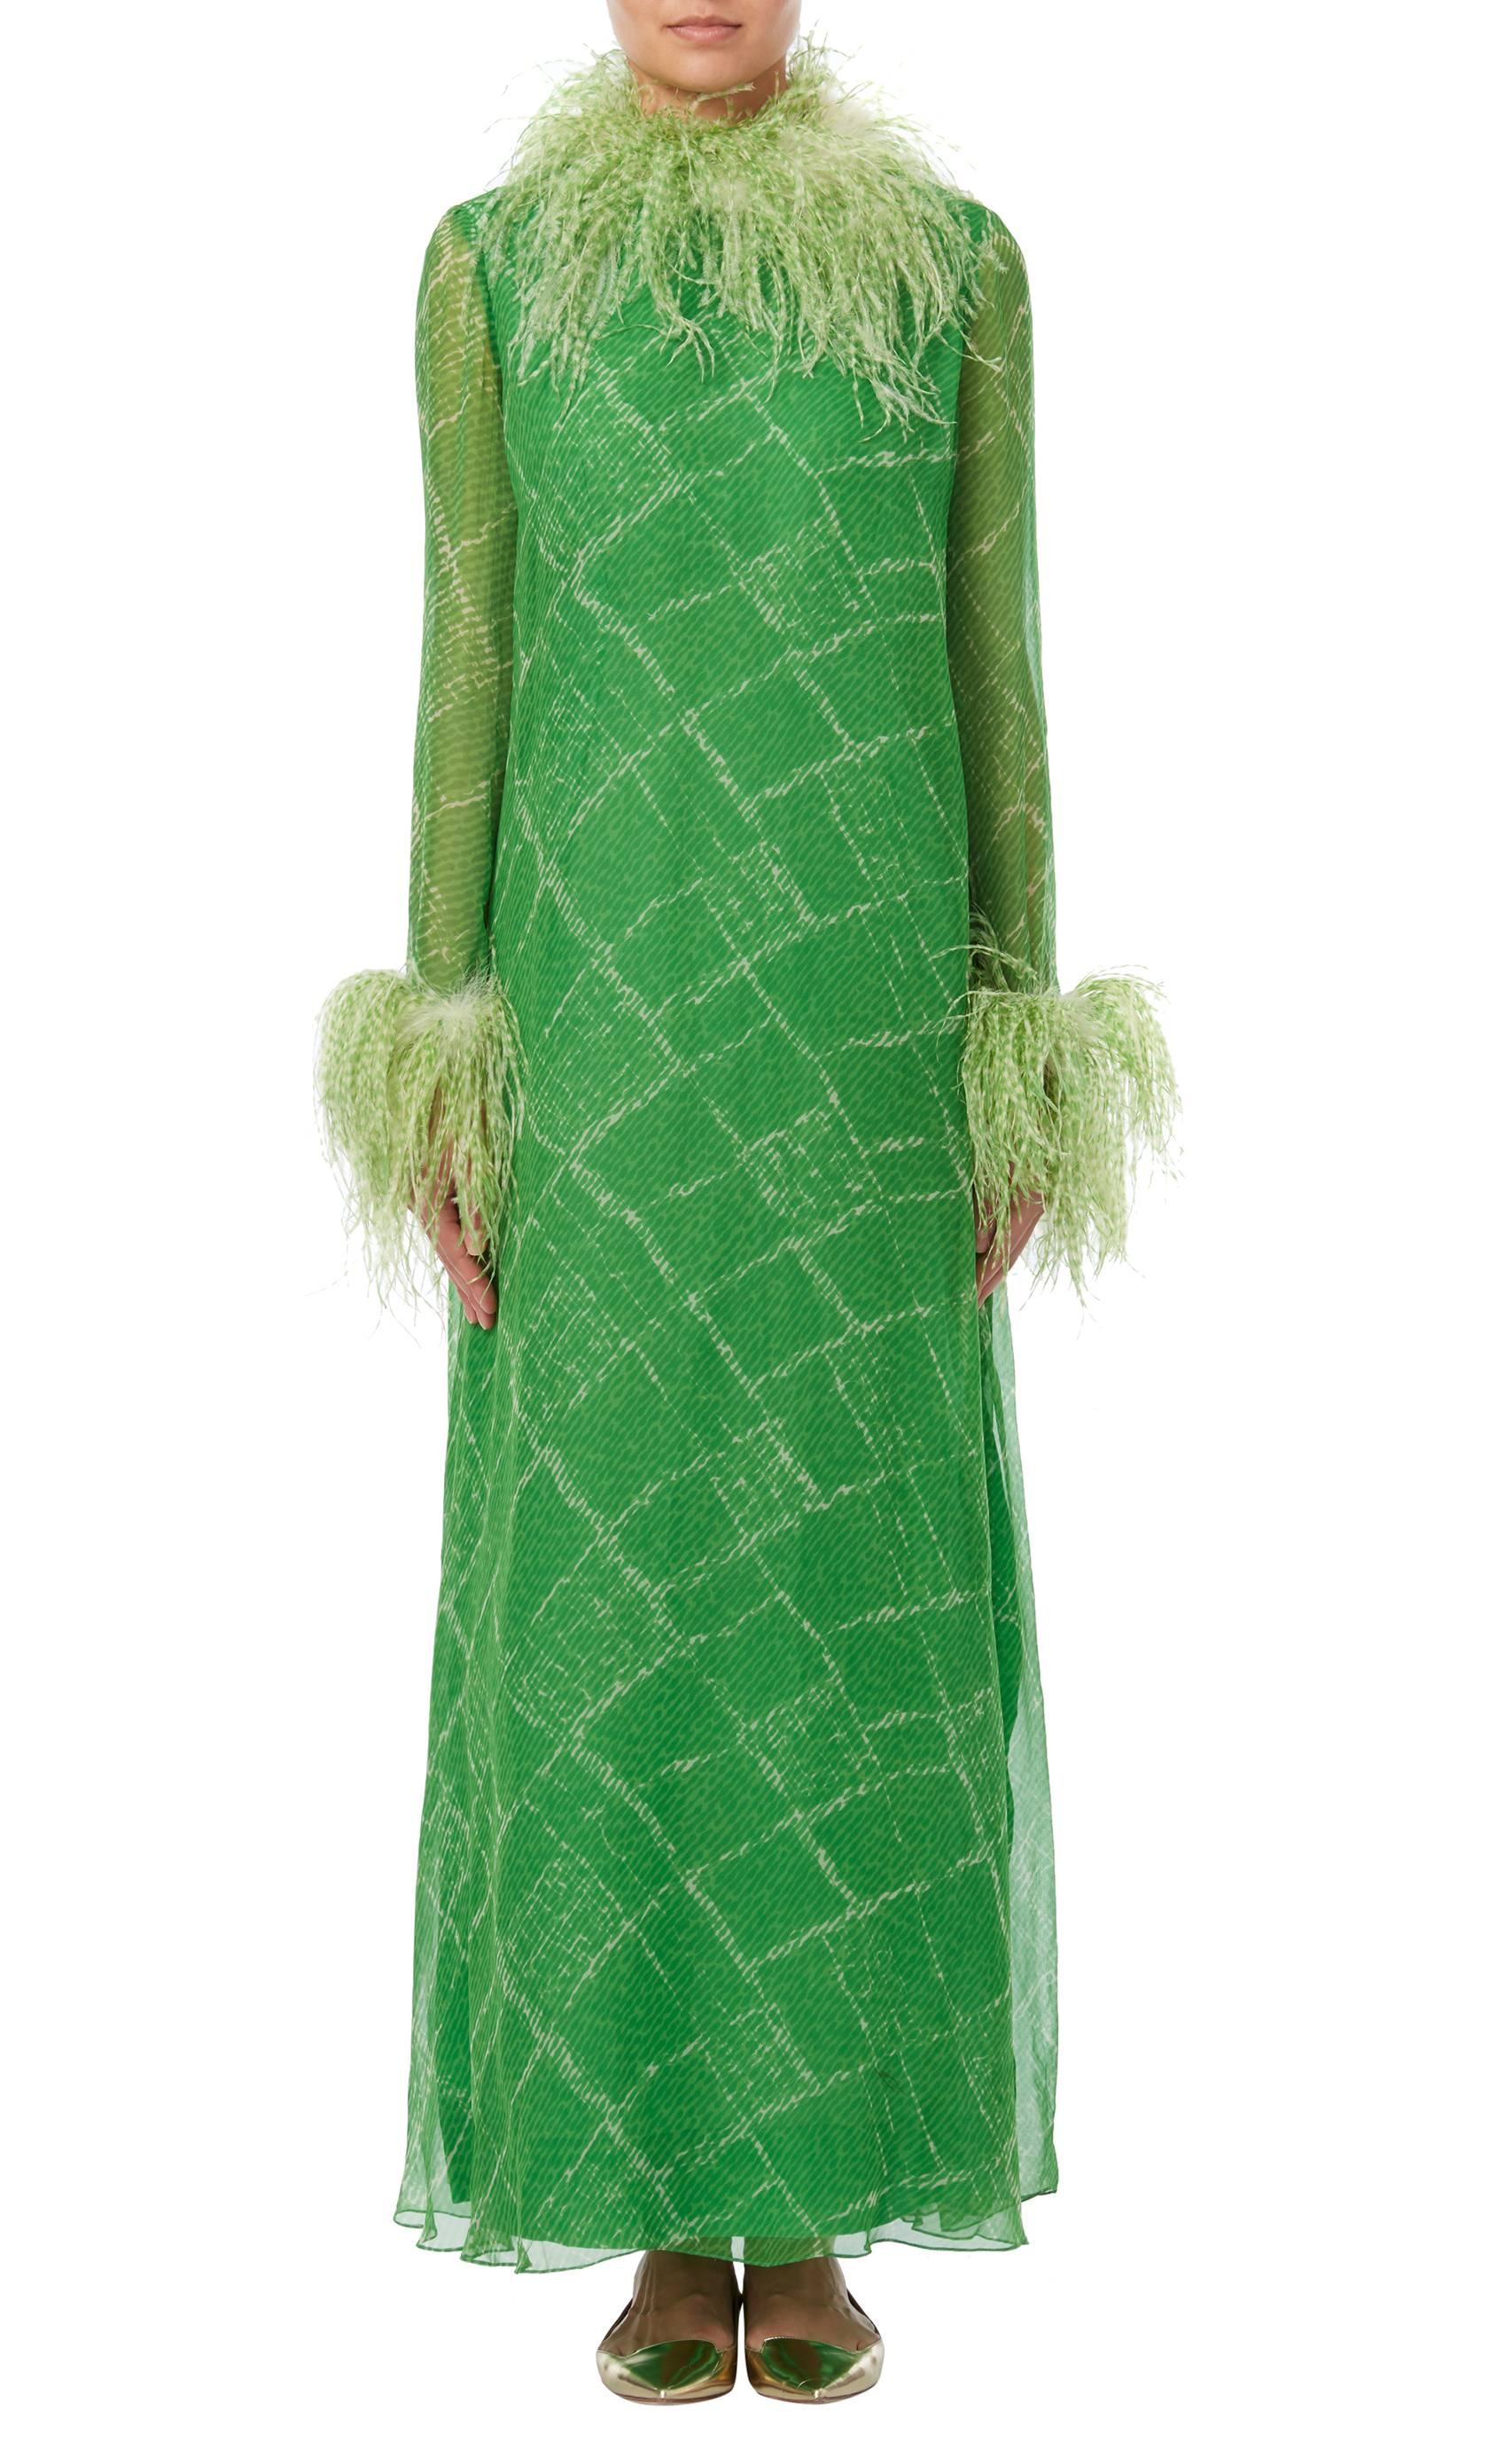 Great Unknown silk chiffon printed maxi dress, circa 1965 from the legendary Nan Duskin Boutique in Philadelphia. The dress features an all-over abstract print and has ostrich feather detailing to the neck and cuffs.